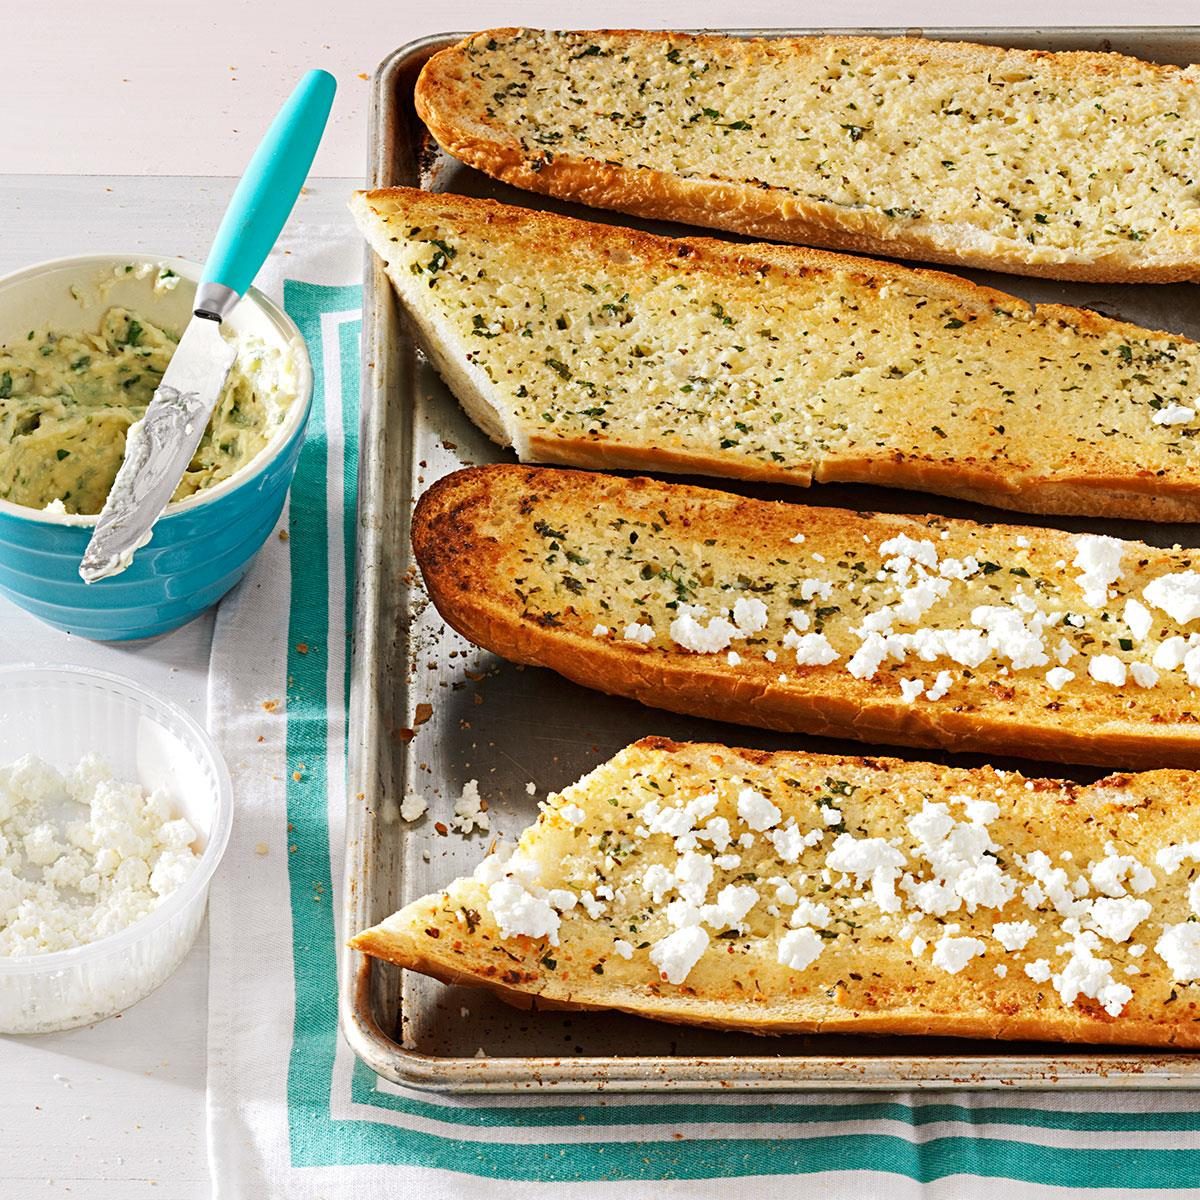 https://www.tasteofhome.com/wp-content/uploads/2017/09/Herb-Happy-Garlic-Bread_exps159288_TH2379800A05_03_2bC_RMS.jpg?fit=700%2C1024